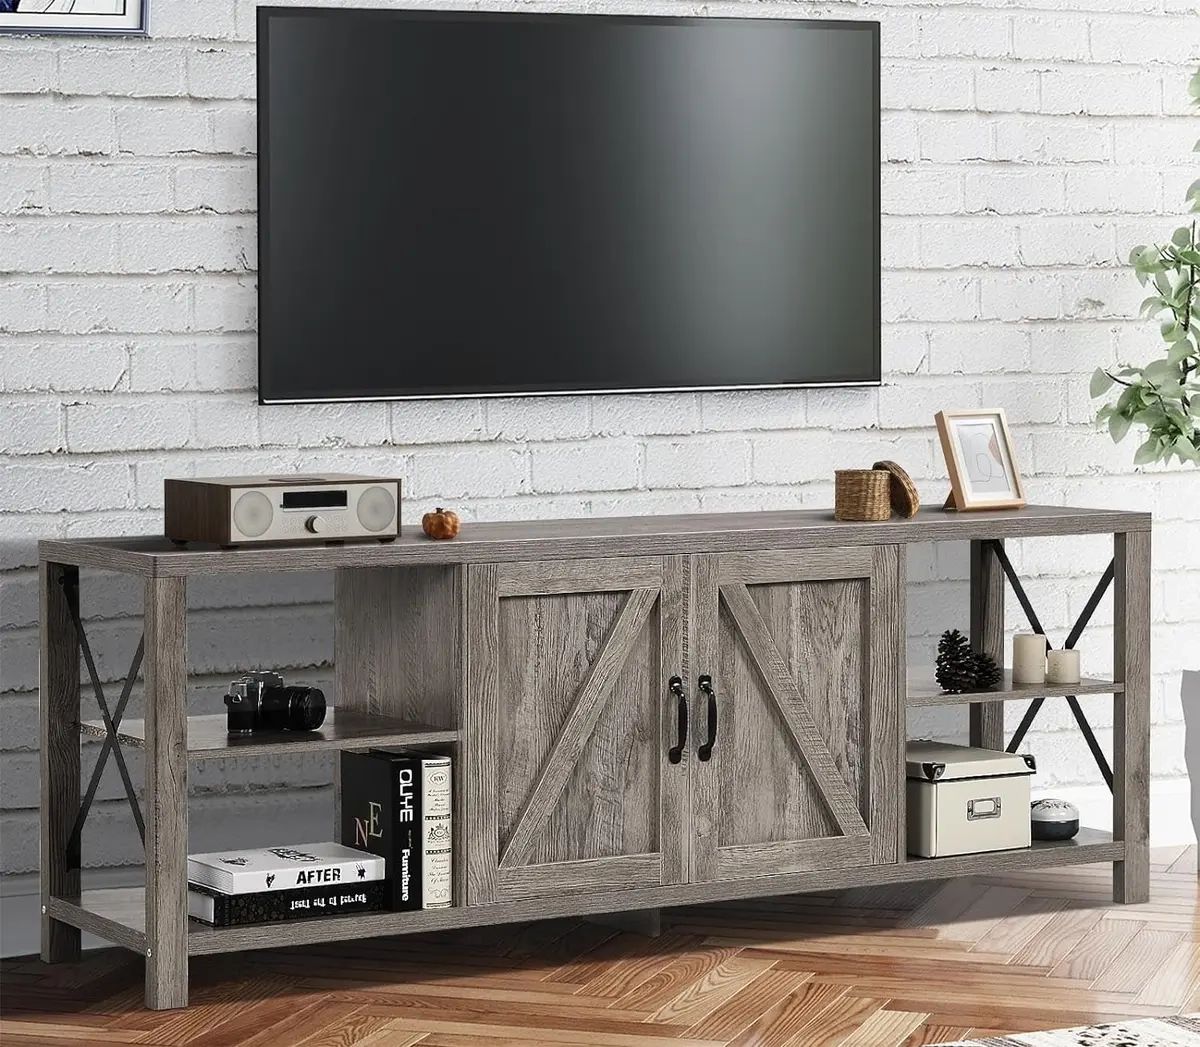 70" Farmhouse Tv Stand For 70 75 80 Inch Tv For Living Room, Industrial &  Rustic | Ebay In Farmhouse Tv Stands For 70 Inch Tv (View 11 of 15)